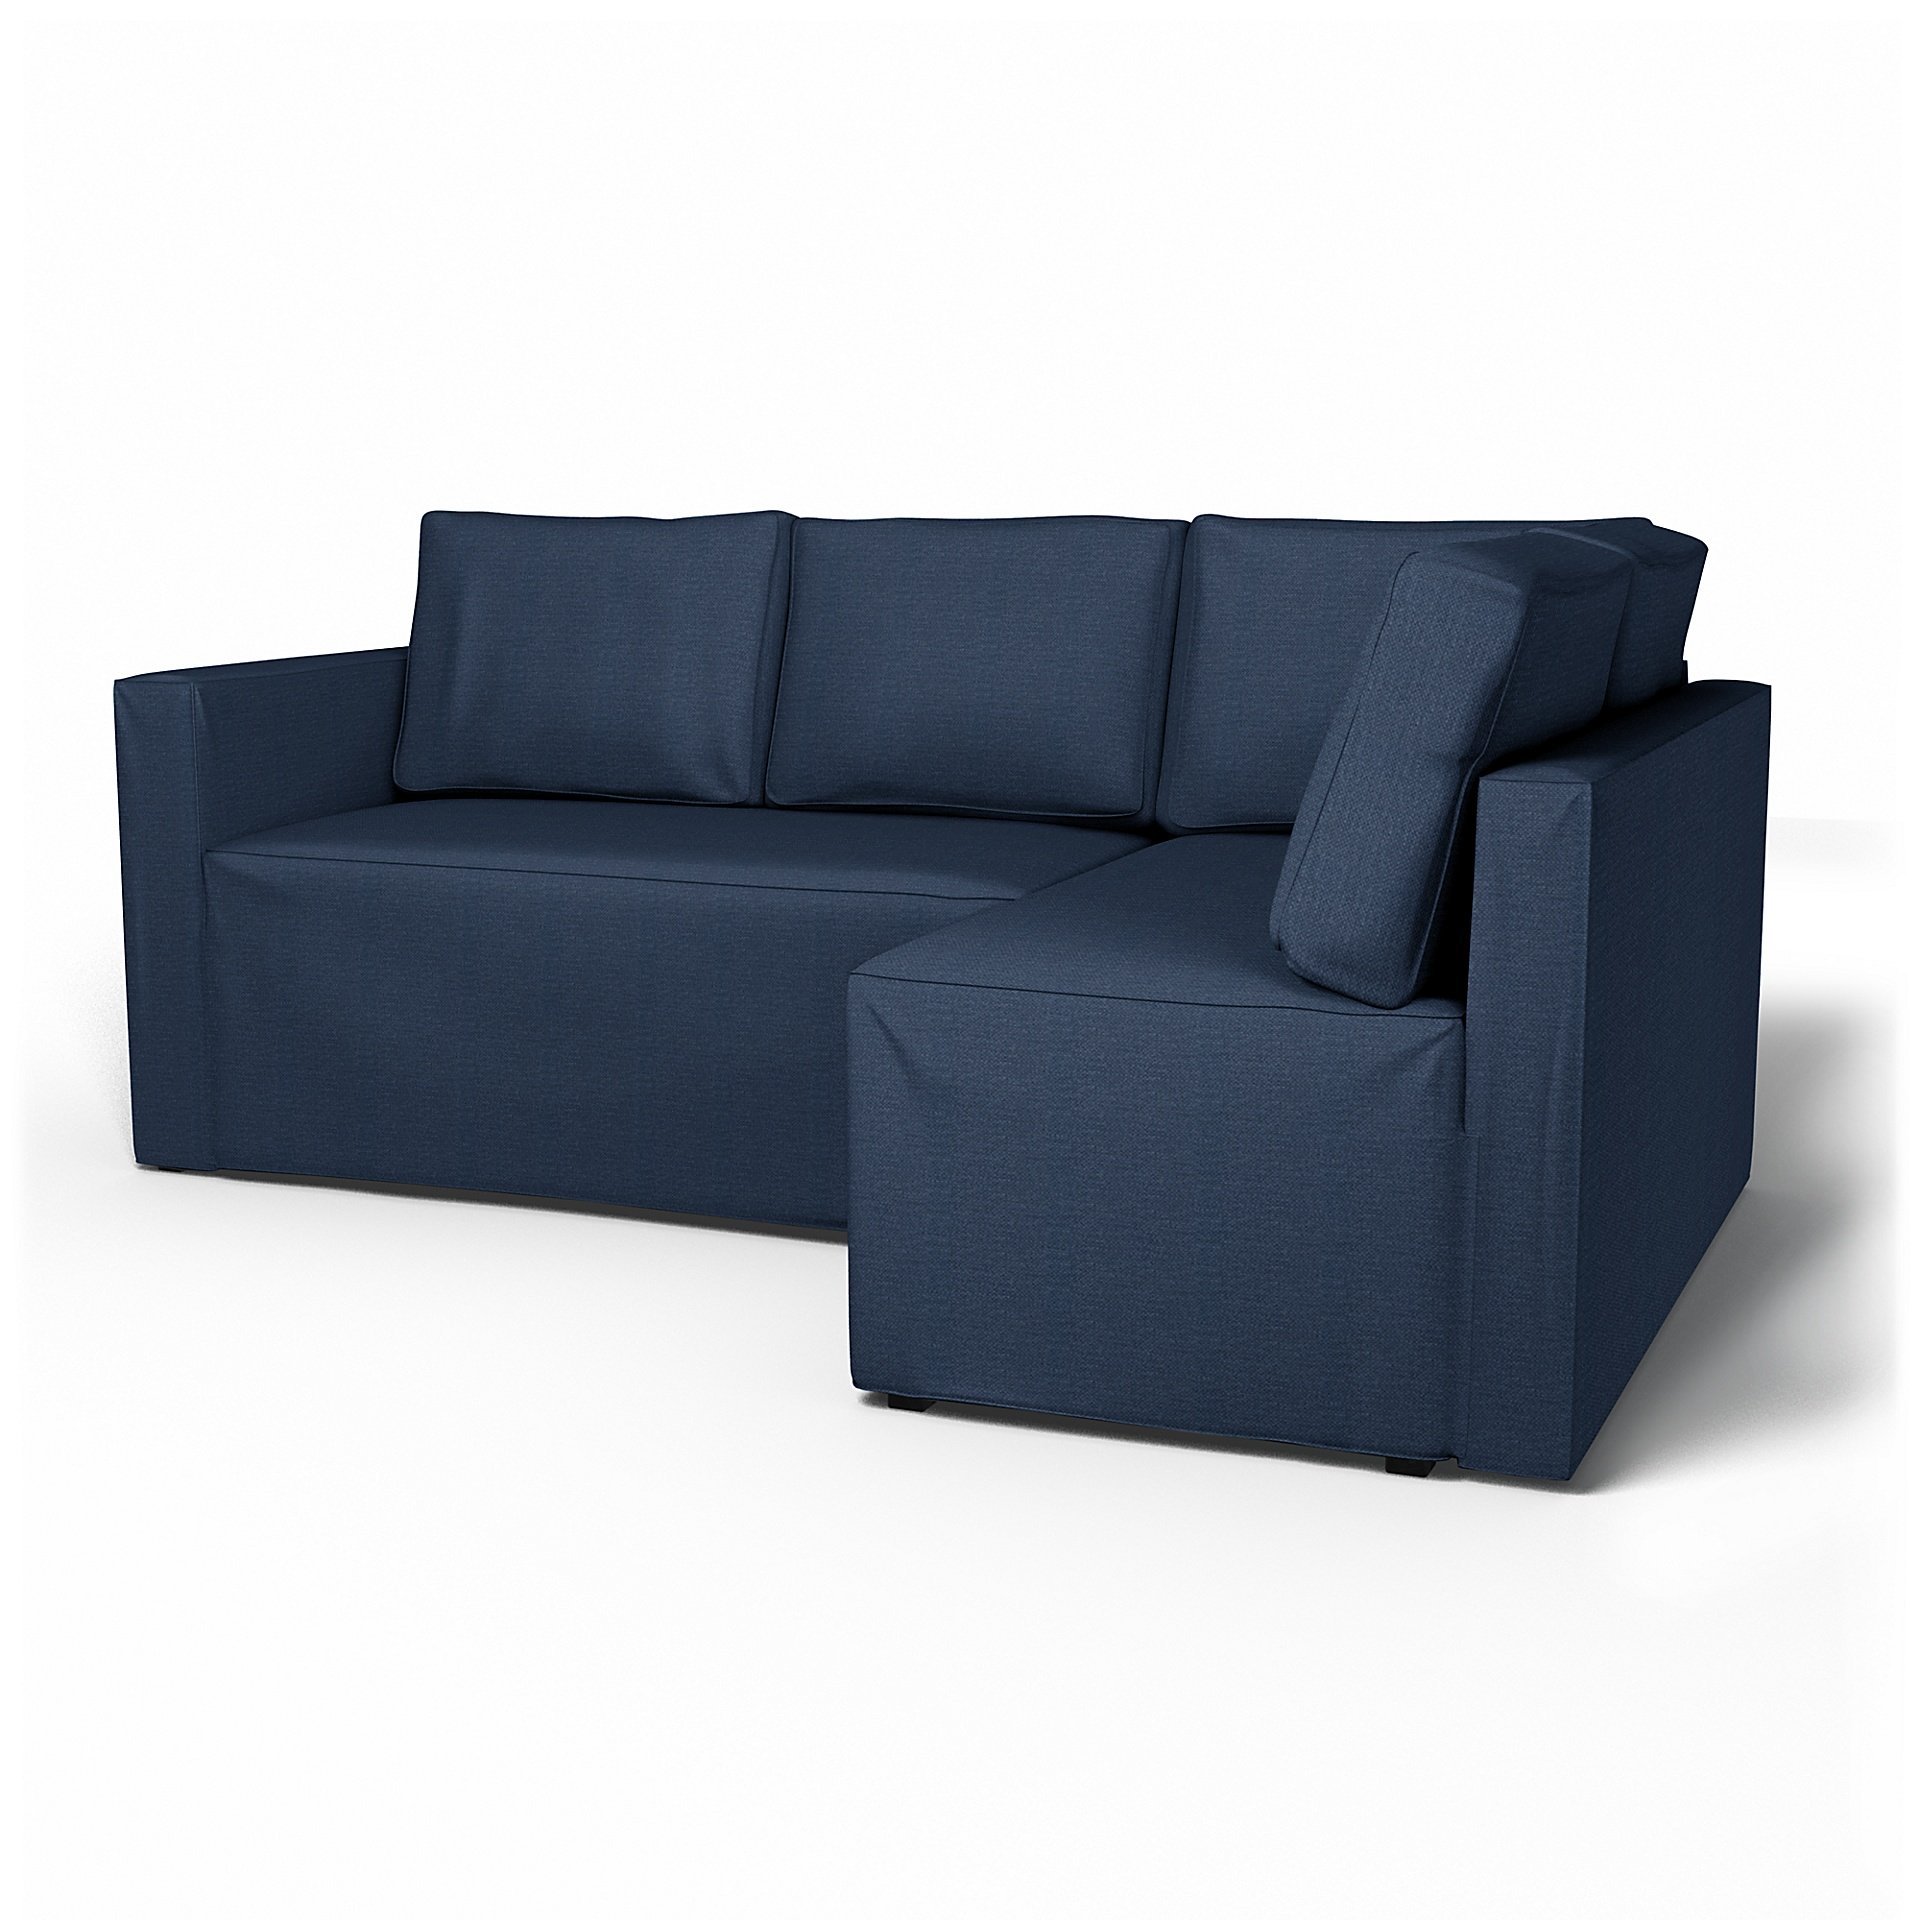 IKEA - Fagelbo Sofa Bed with Right Chaise Cover, Navy Blue, Linen - Bemz